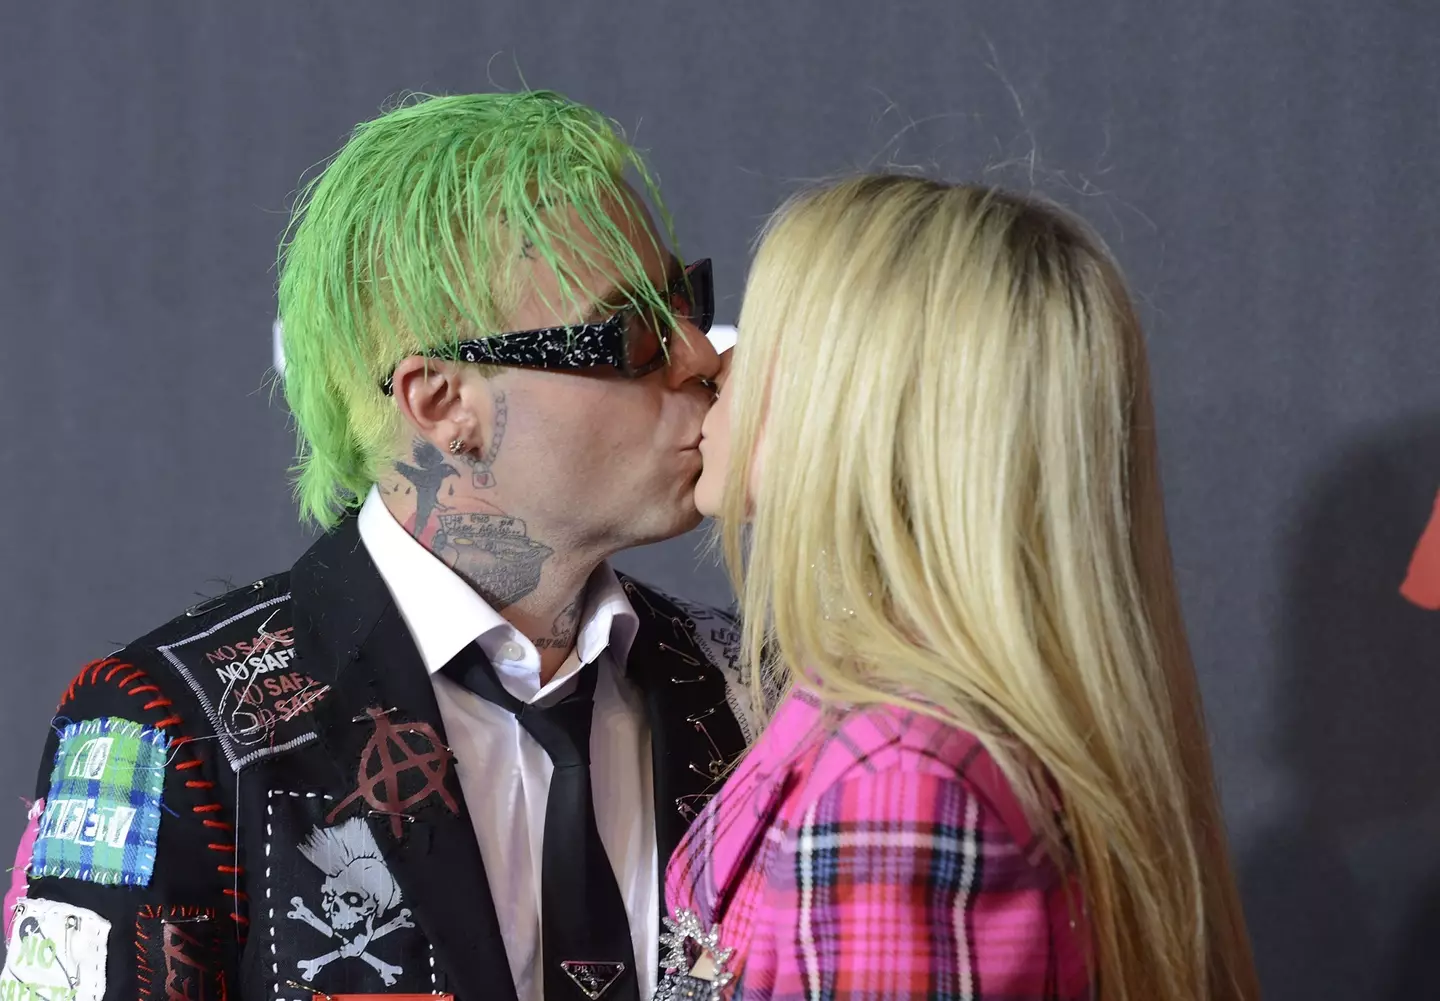 Avril Lavigne and Mod Sun are now happily engaged.